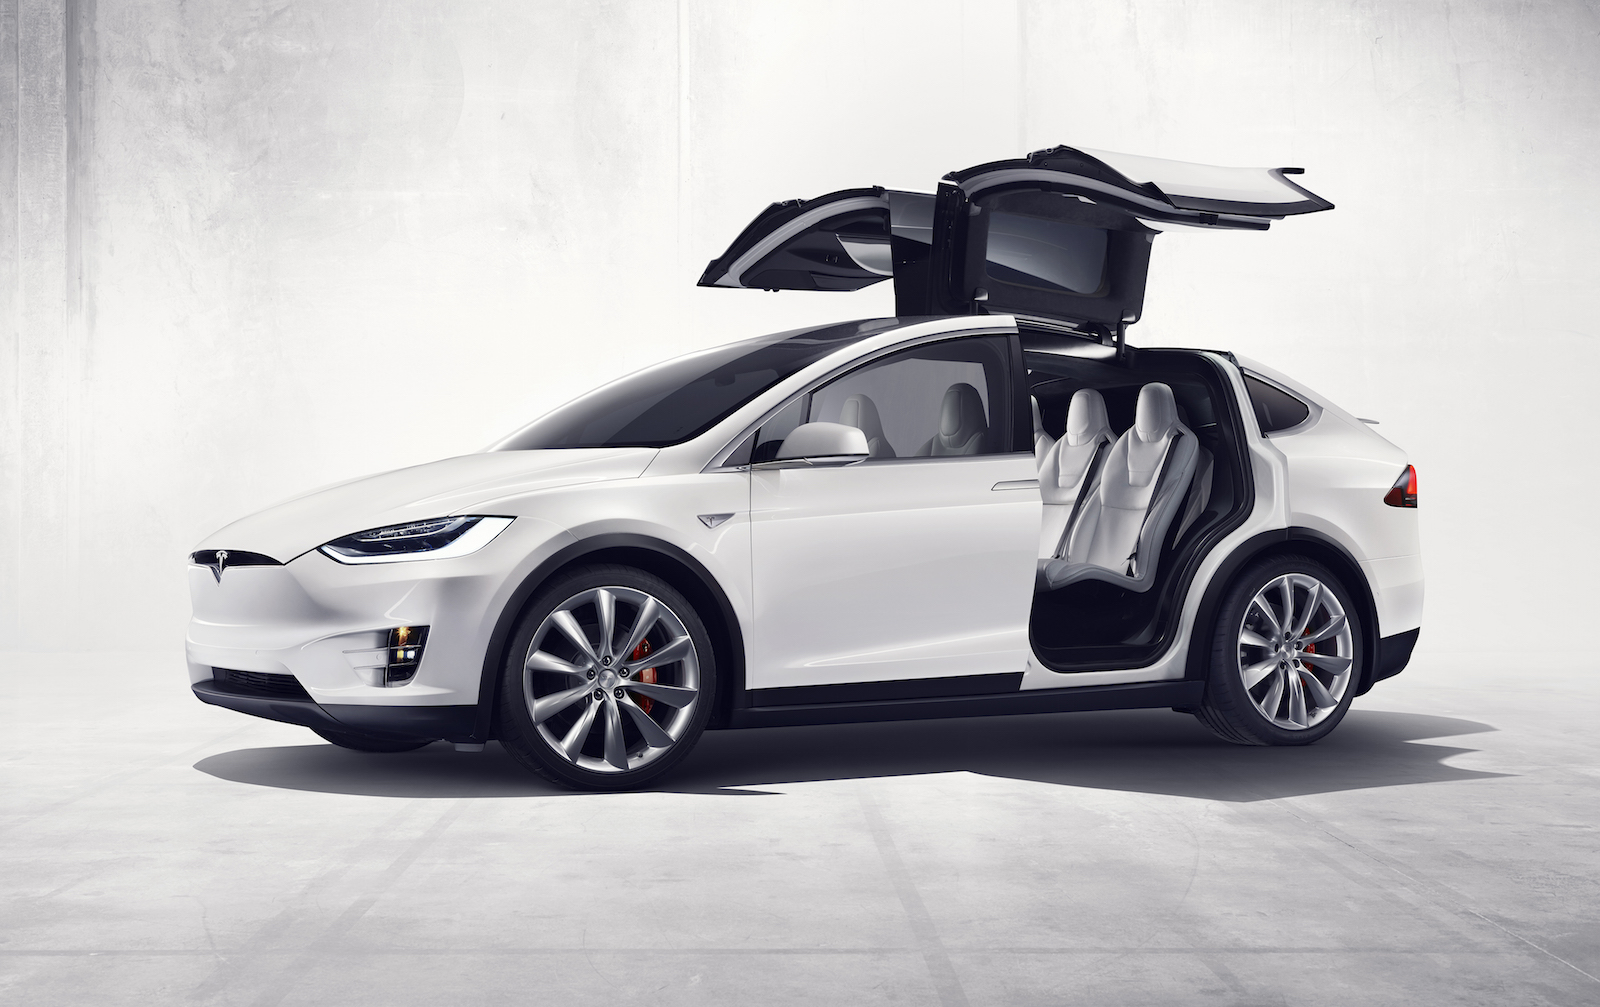 Tesla Model X fully electric SUV revealed, 0-60mph in 3.2 seconds